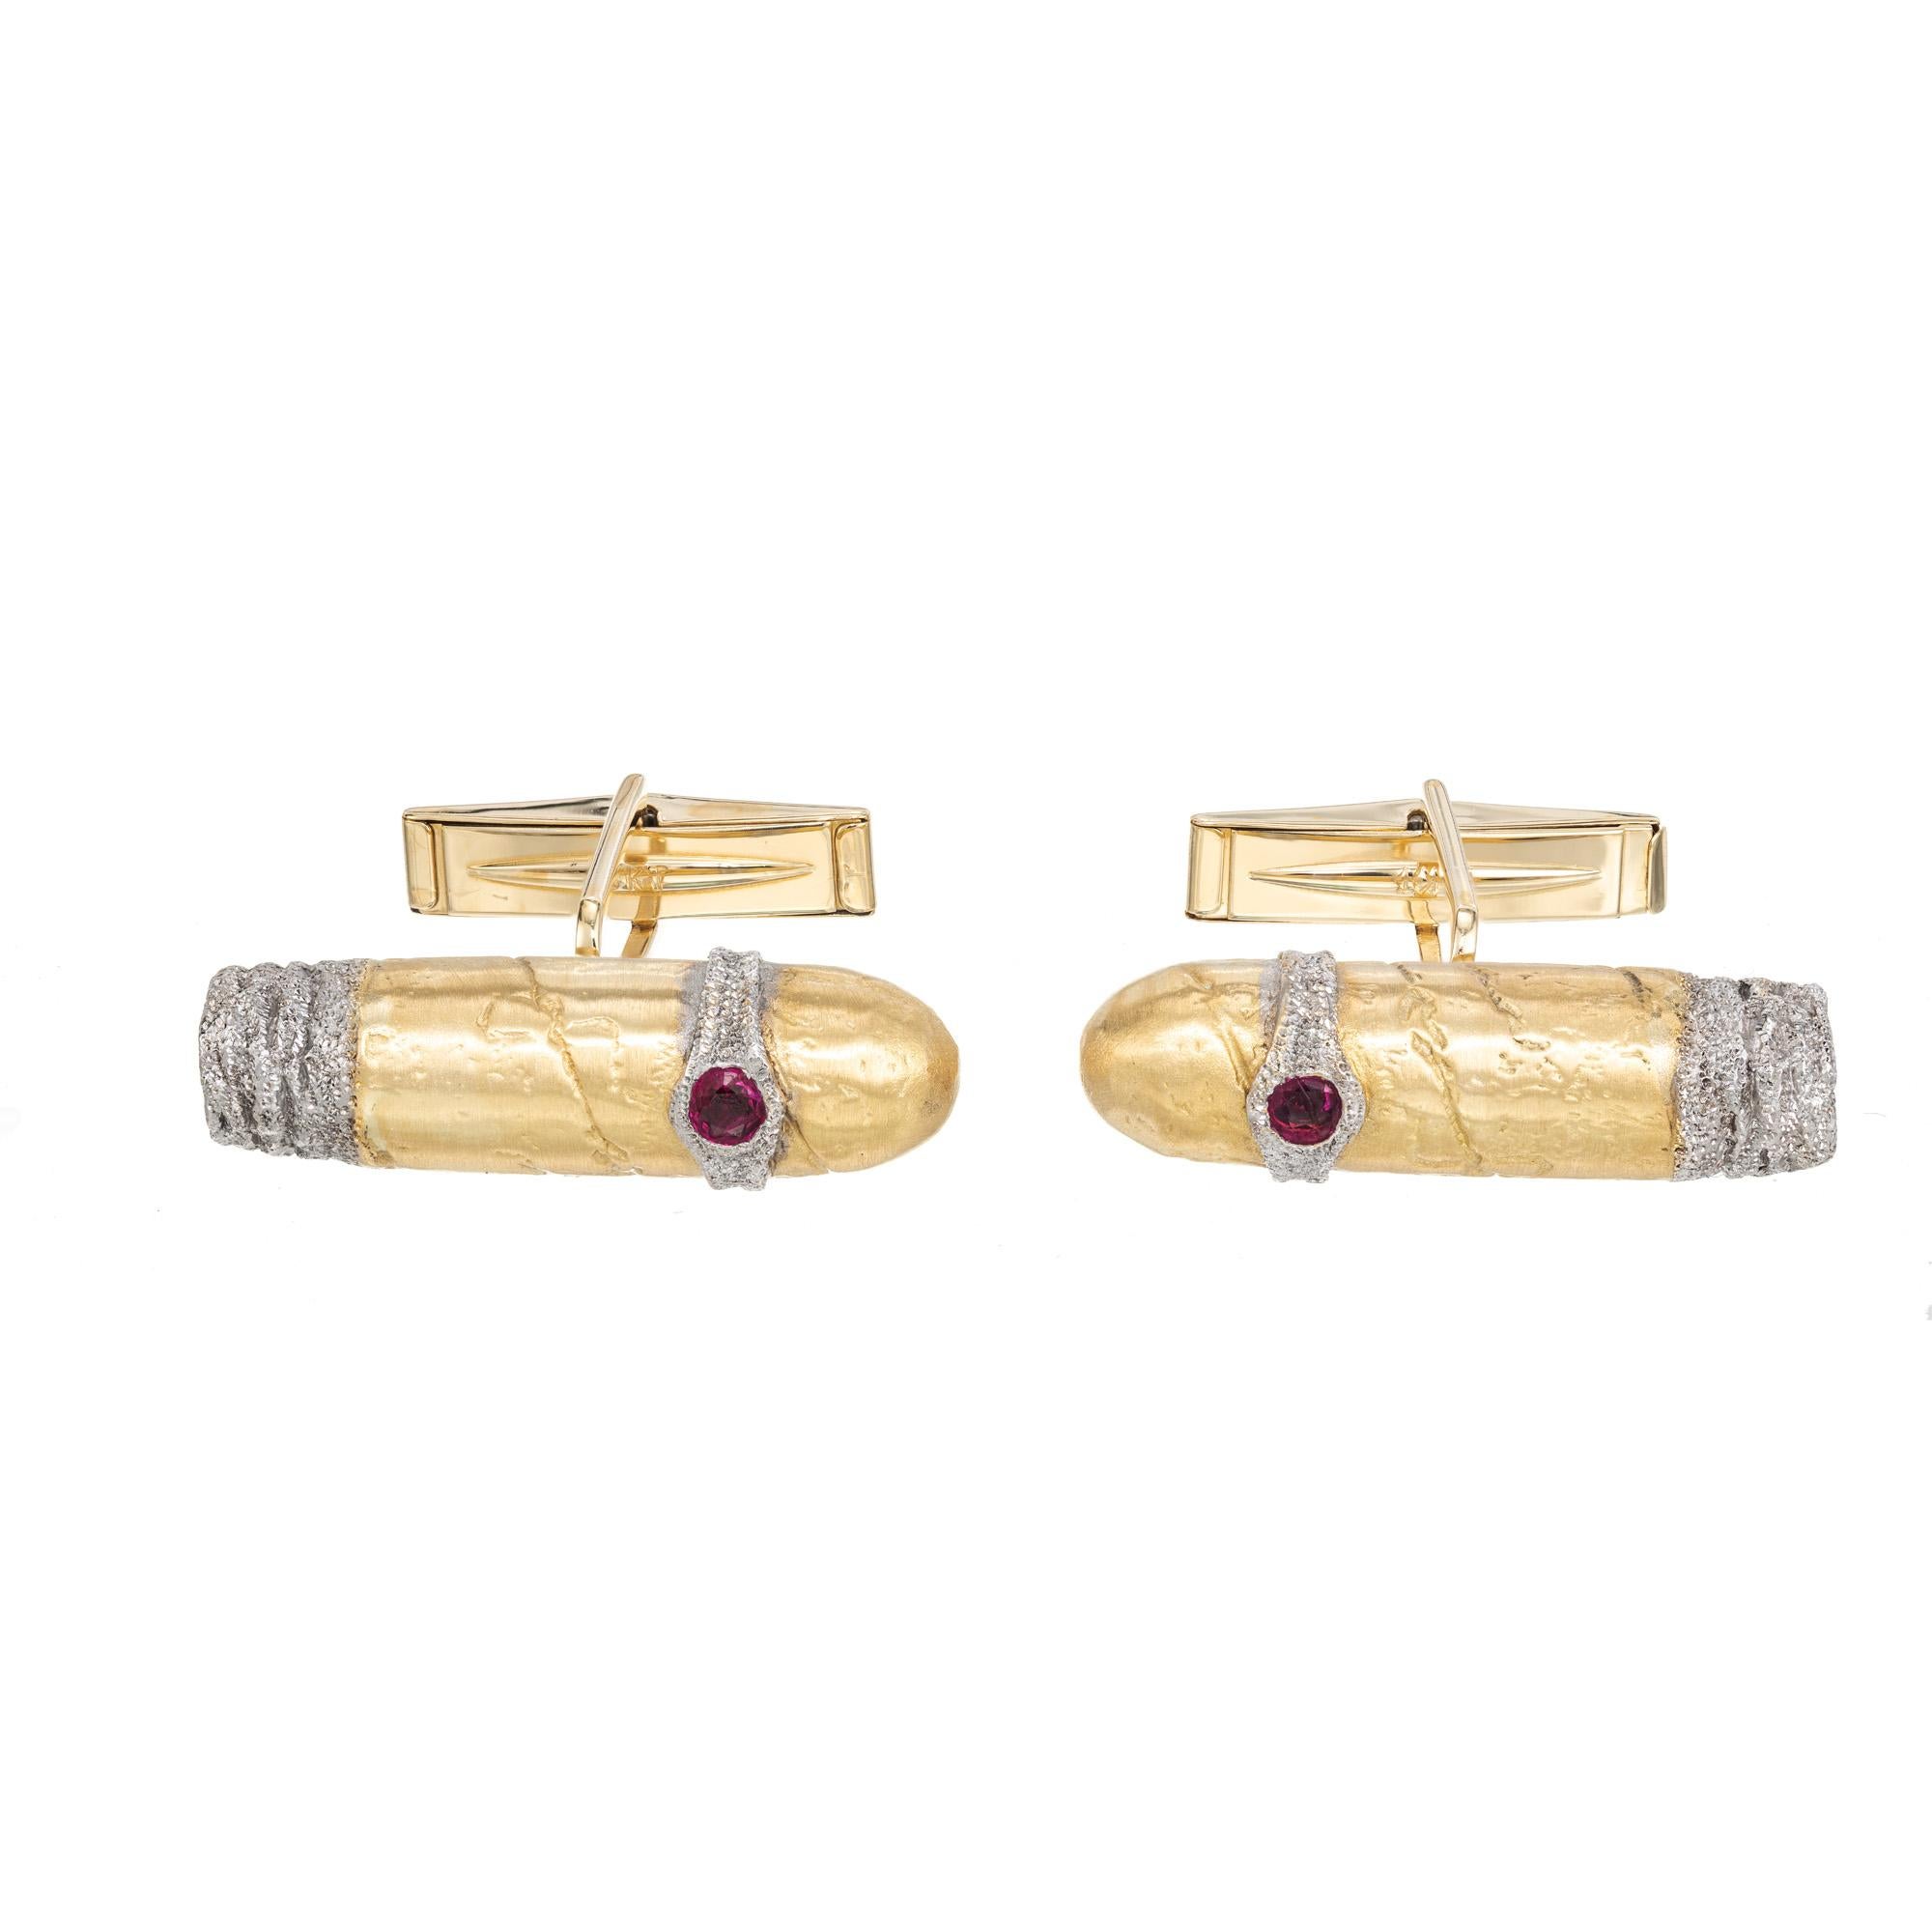 Beautiful 3D designer men's cufflinks. Unique cigar styled 18k yellow and white gold textured finish cufflinks. The cigar band and tip are textured white gold. Each cigar band is adorned with one round ruby.

2 round red rubies, approx. .12cts
18k